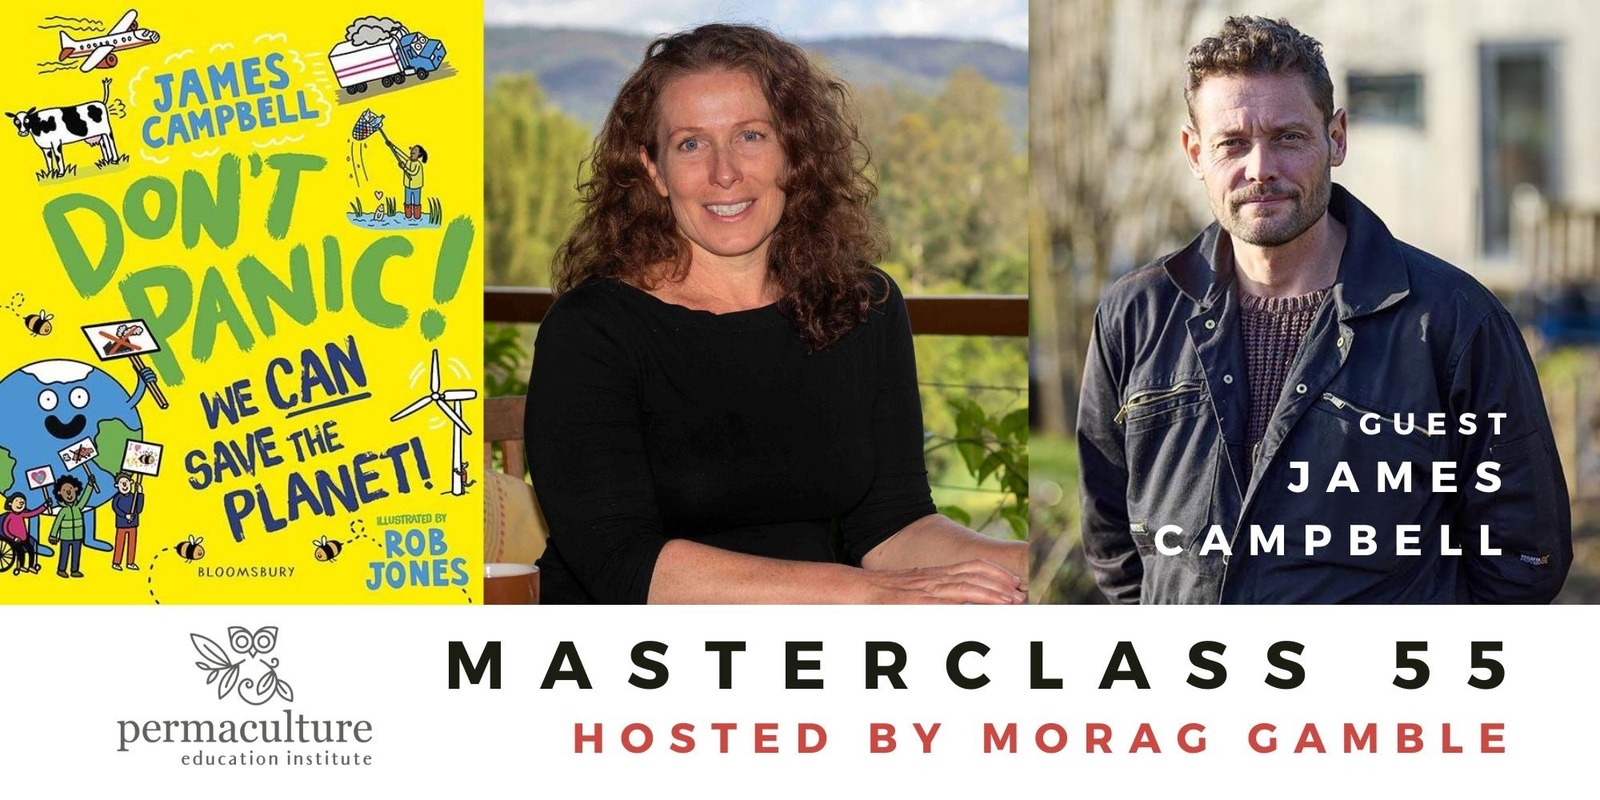 Banner image for Masterclass 55: Don't Panic, We CAN Save the Planet! Morag Gamble speaks with author James Campbell